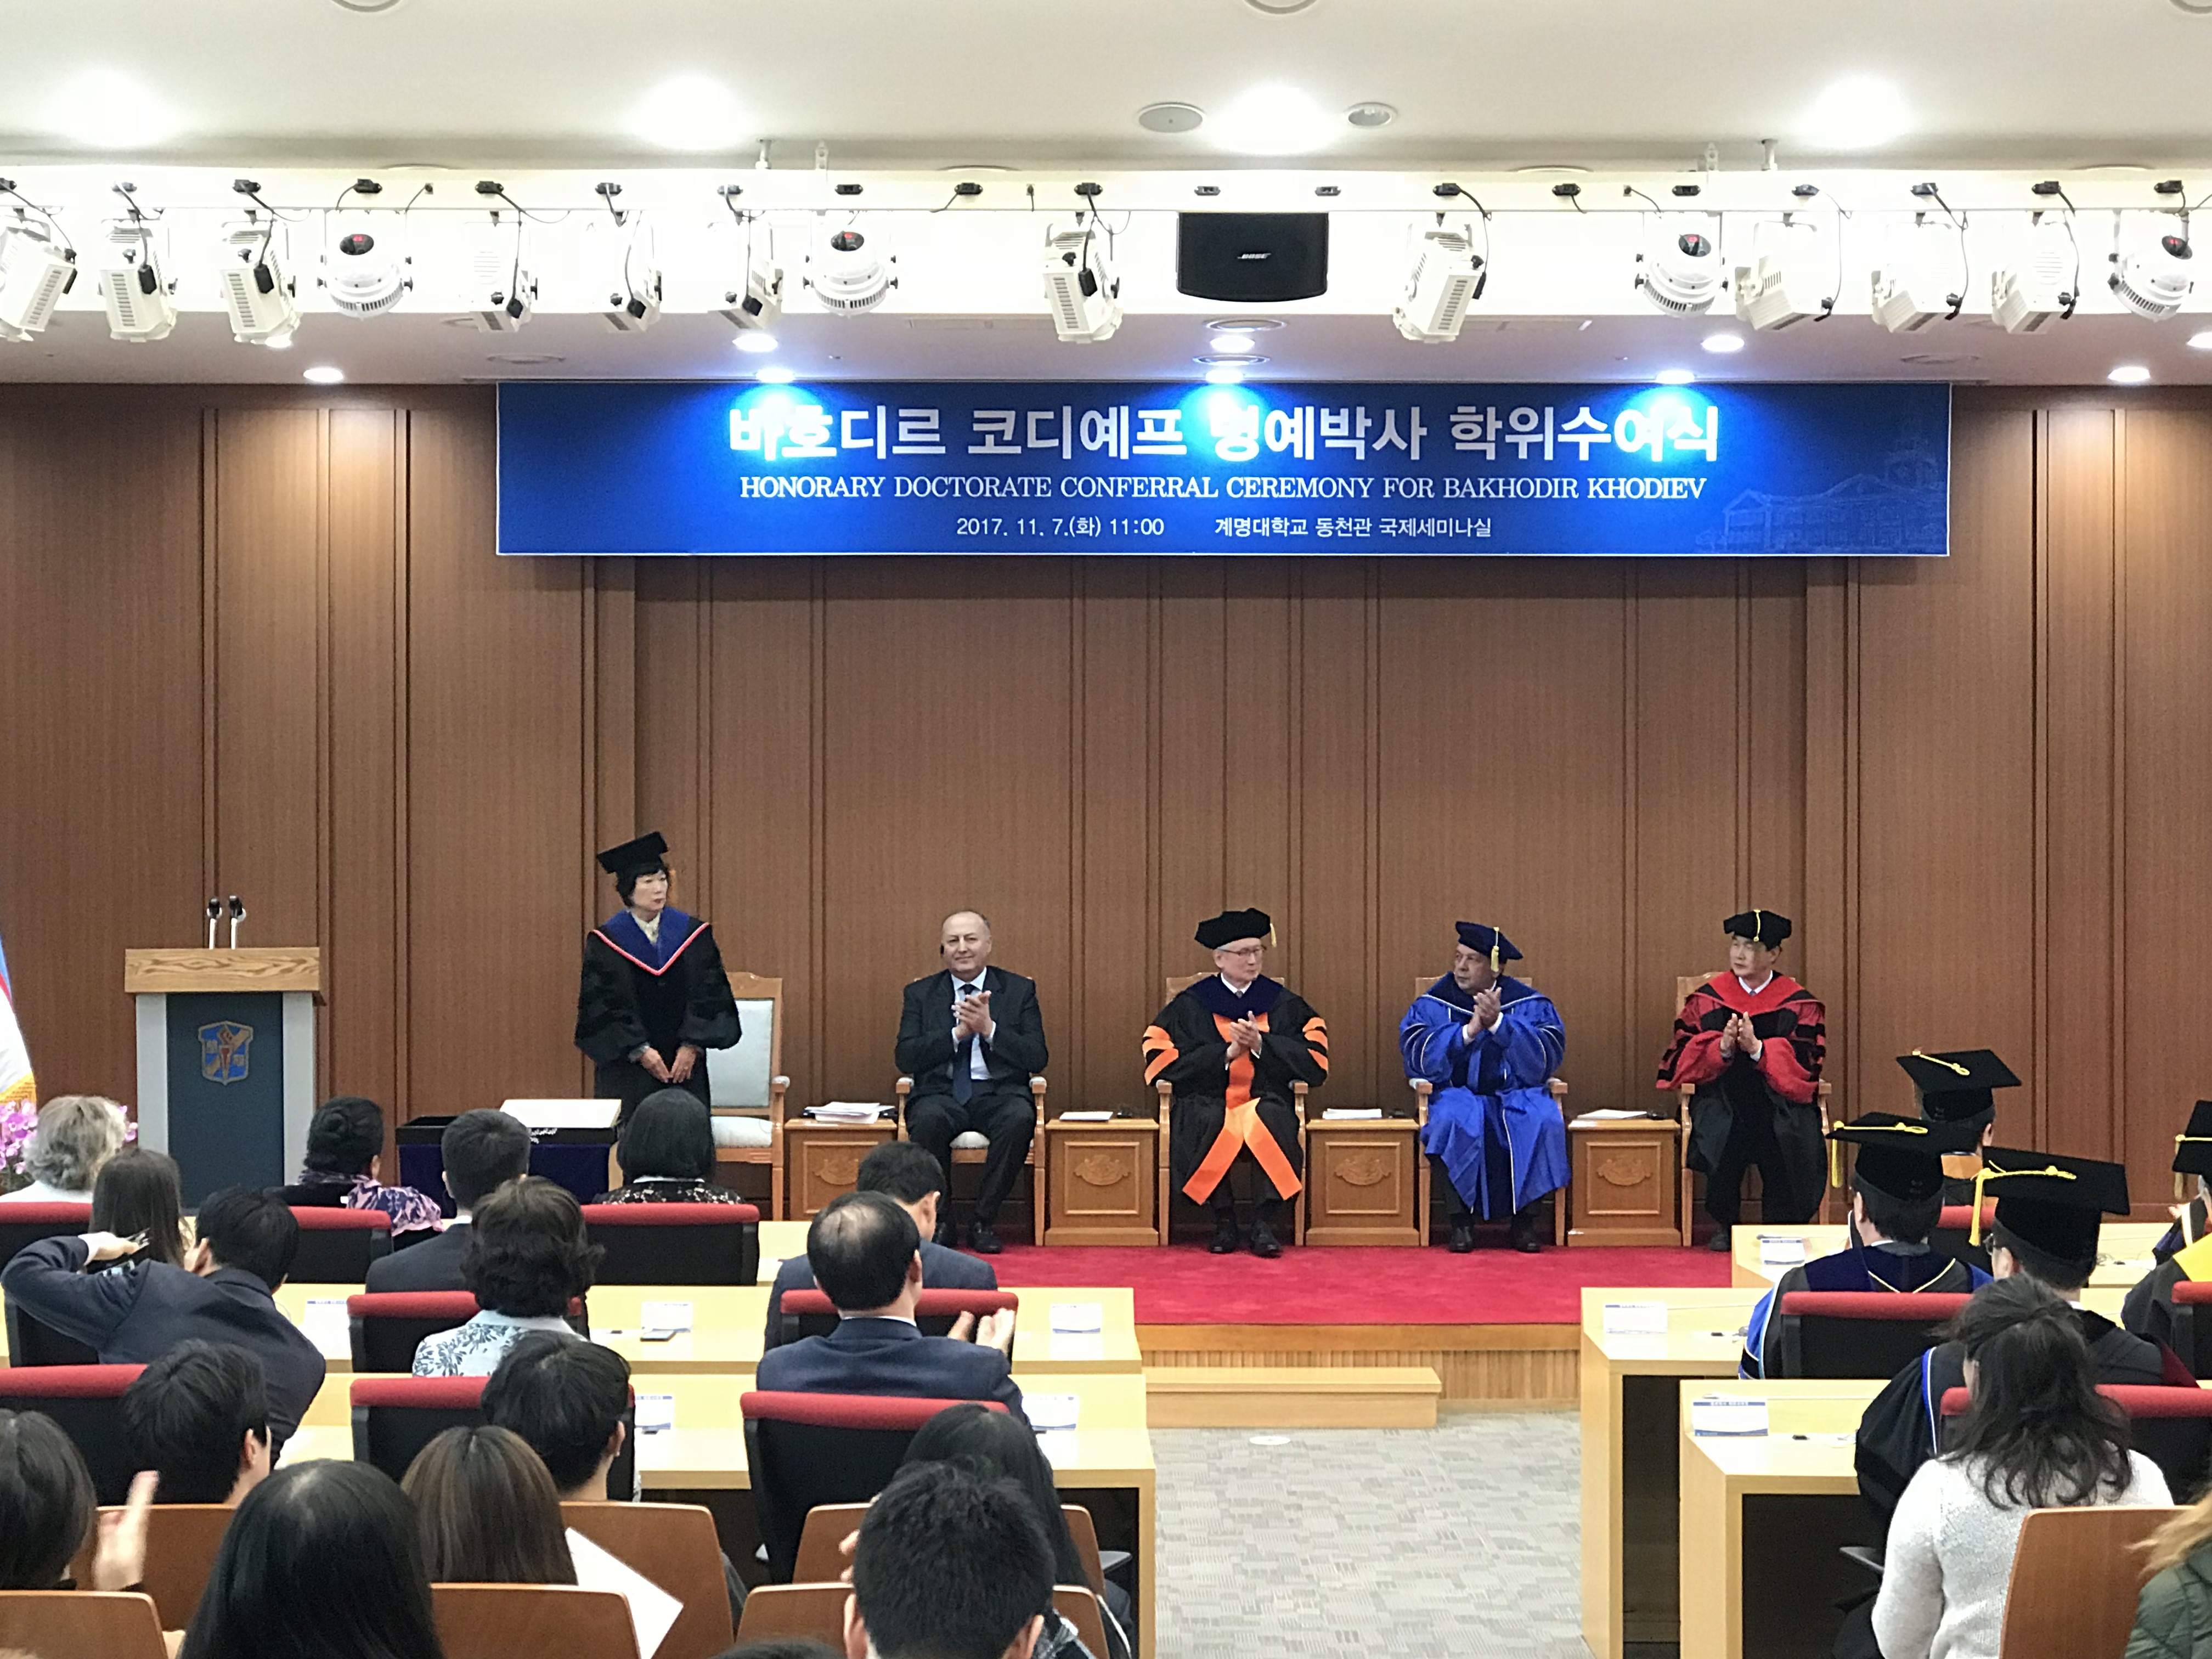 The Awarding Ceremony of an Honorary Doctorate Degree